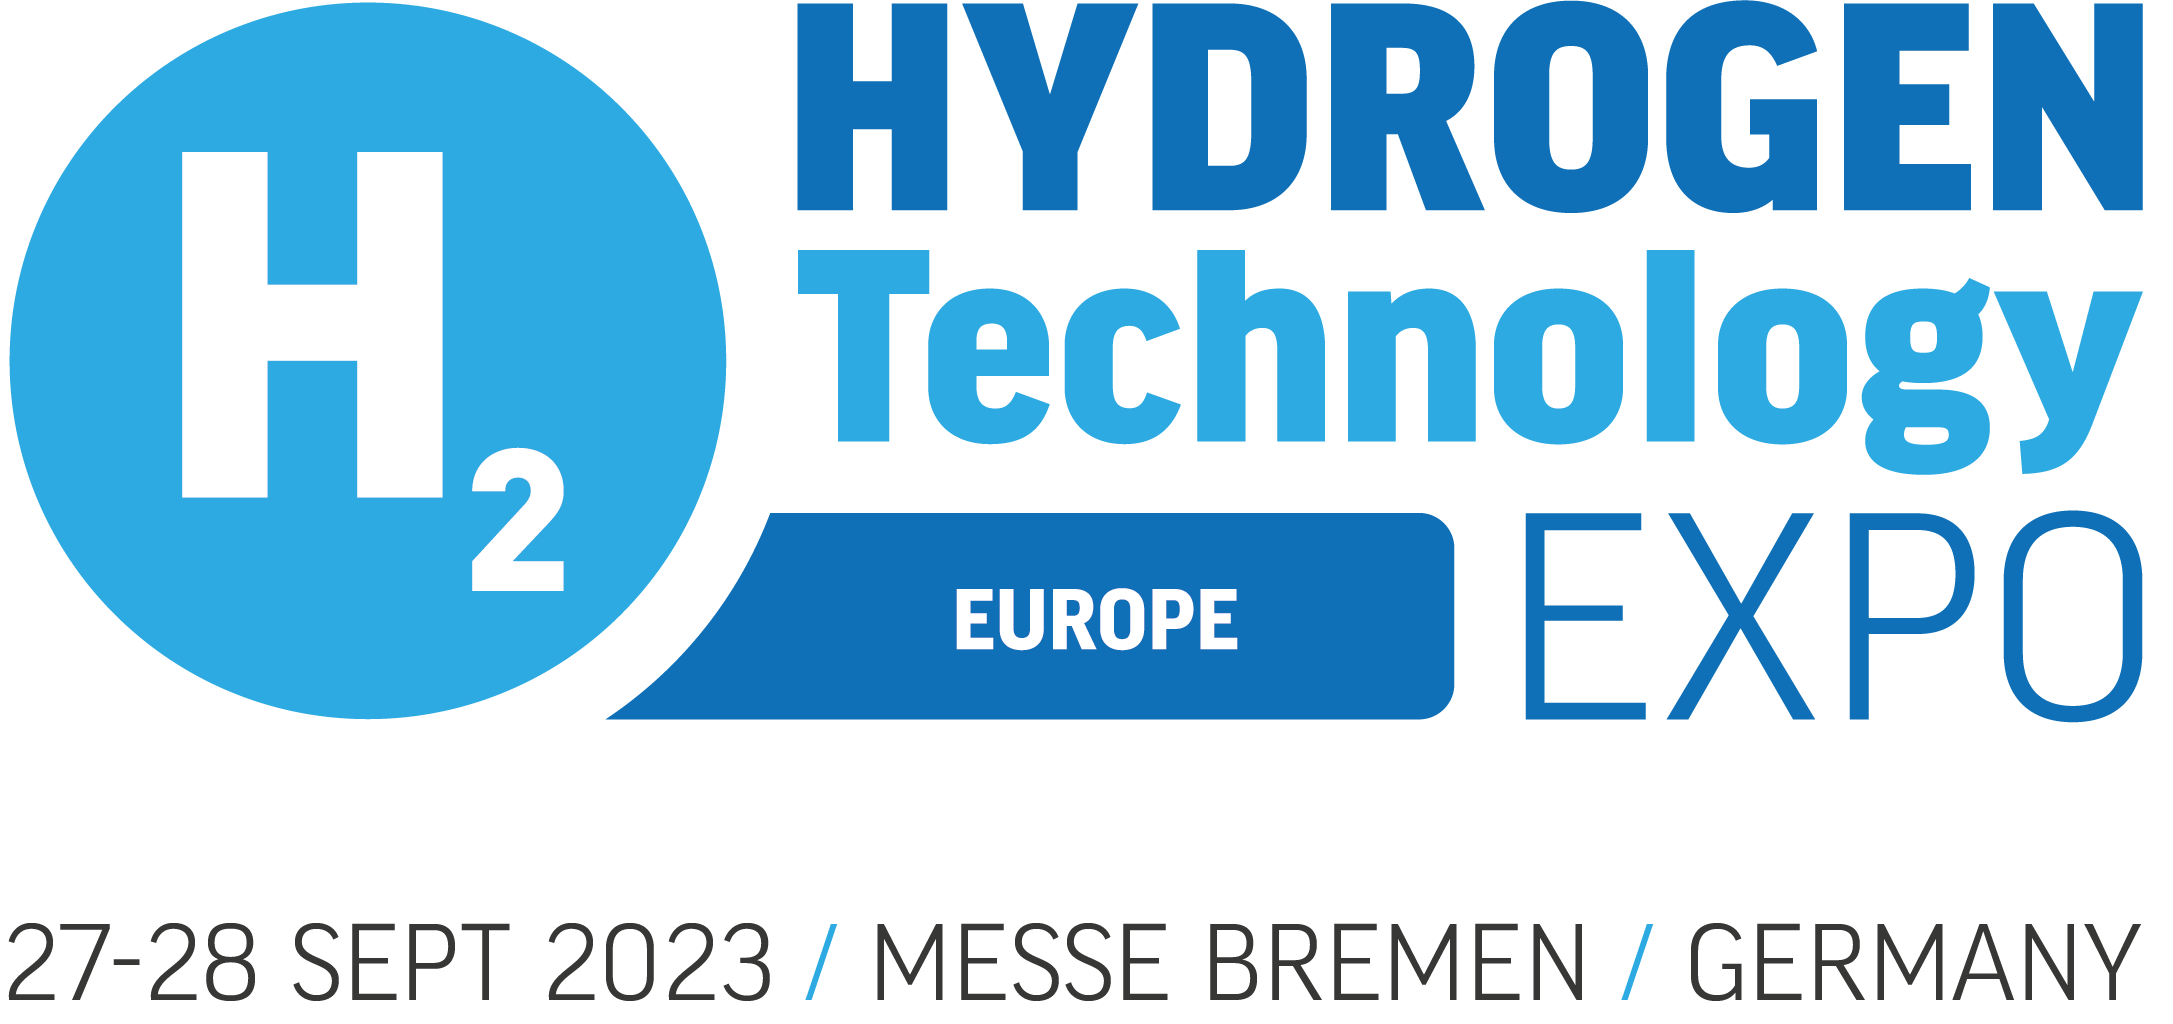 H2 Technology Expo Europe